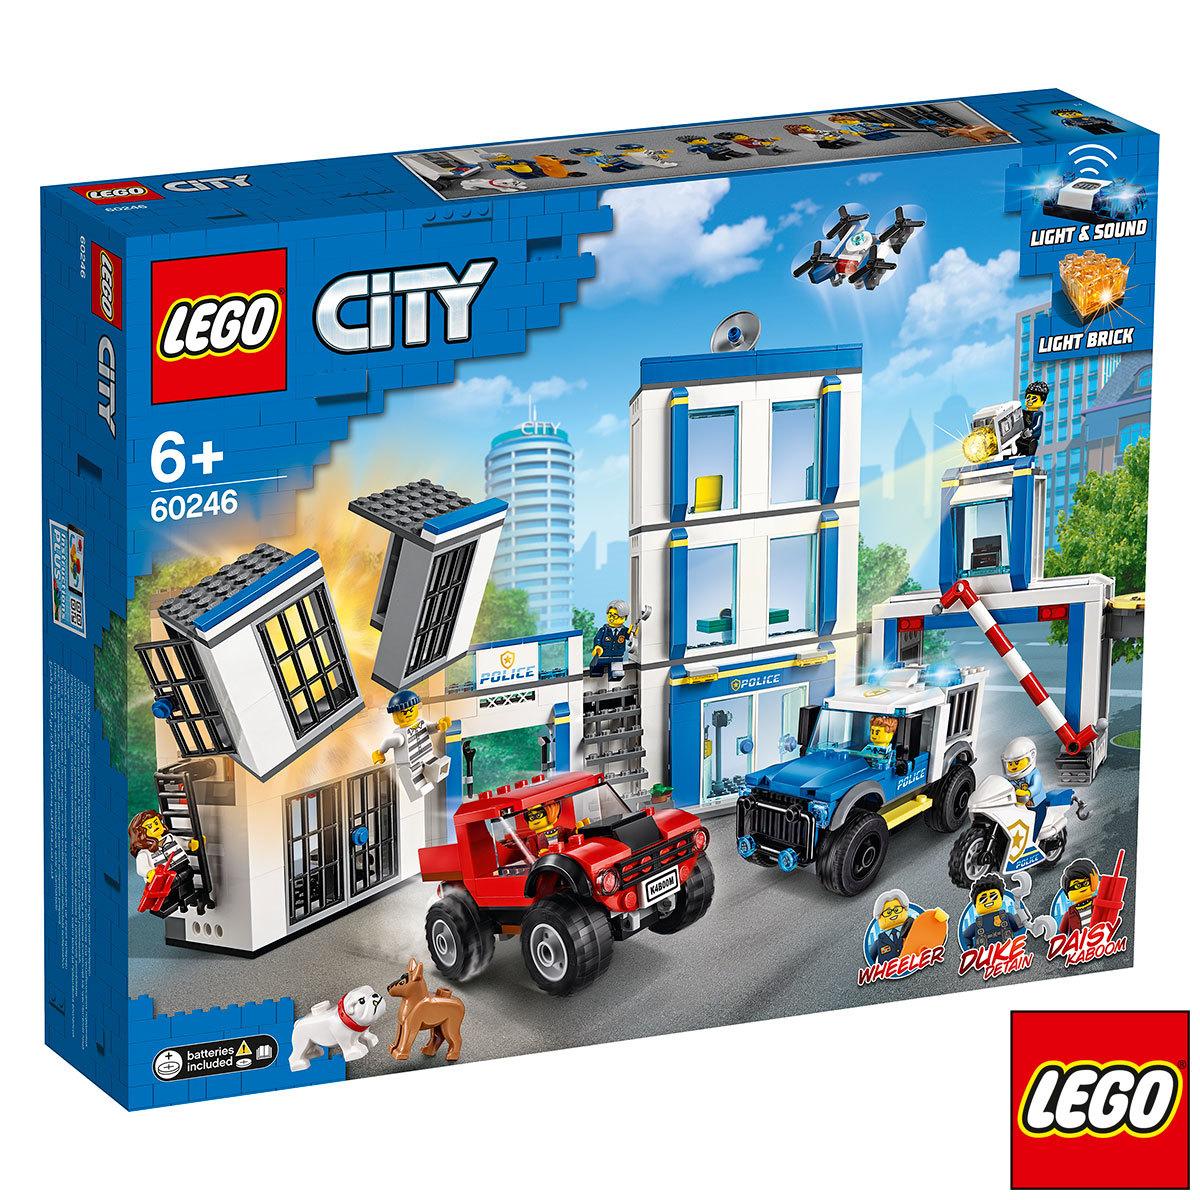 LEGO City Police Station 60246 (6+ Years) |